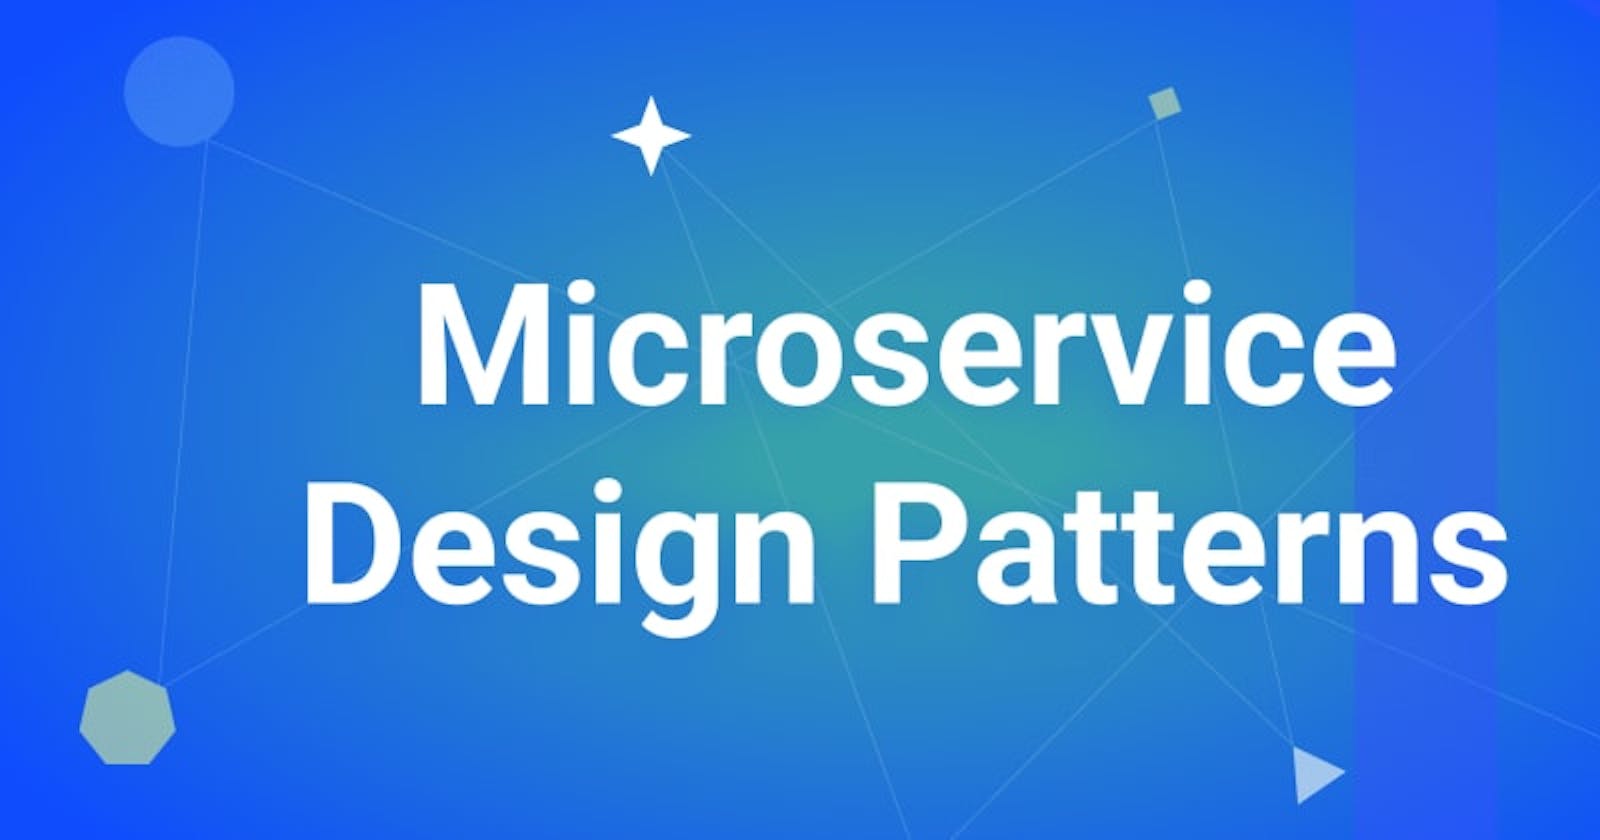 7 Microservice Design Patterns to Use